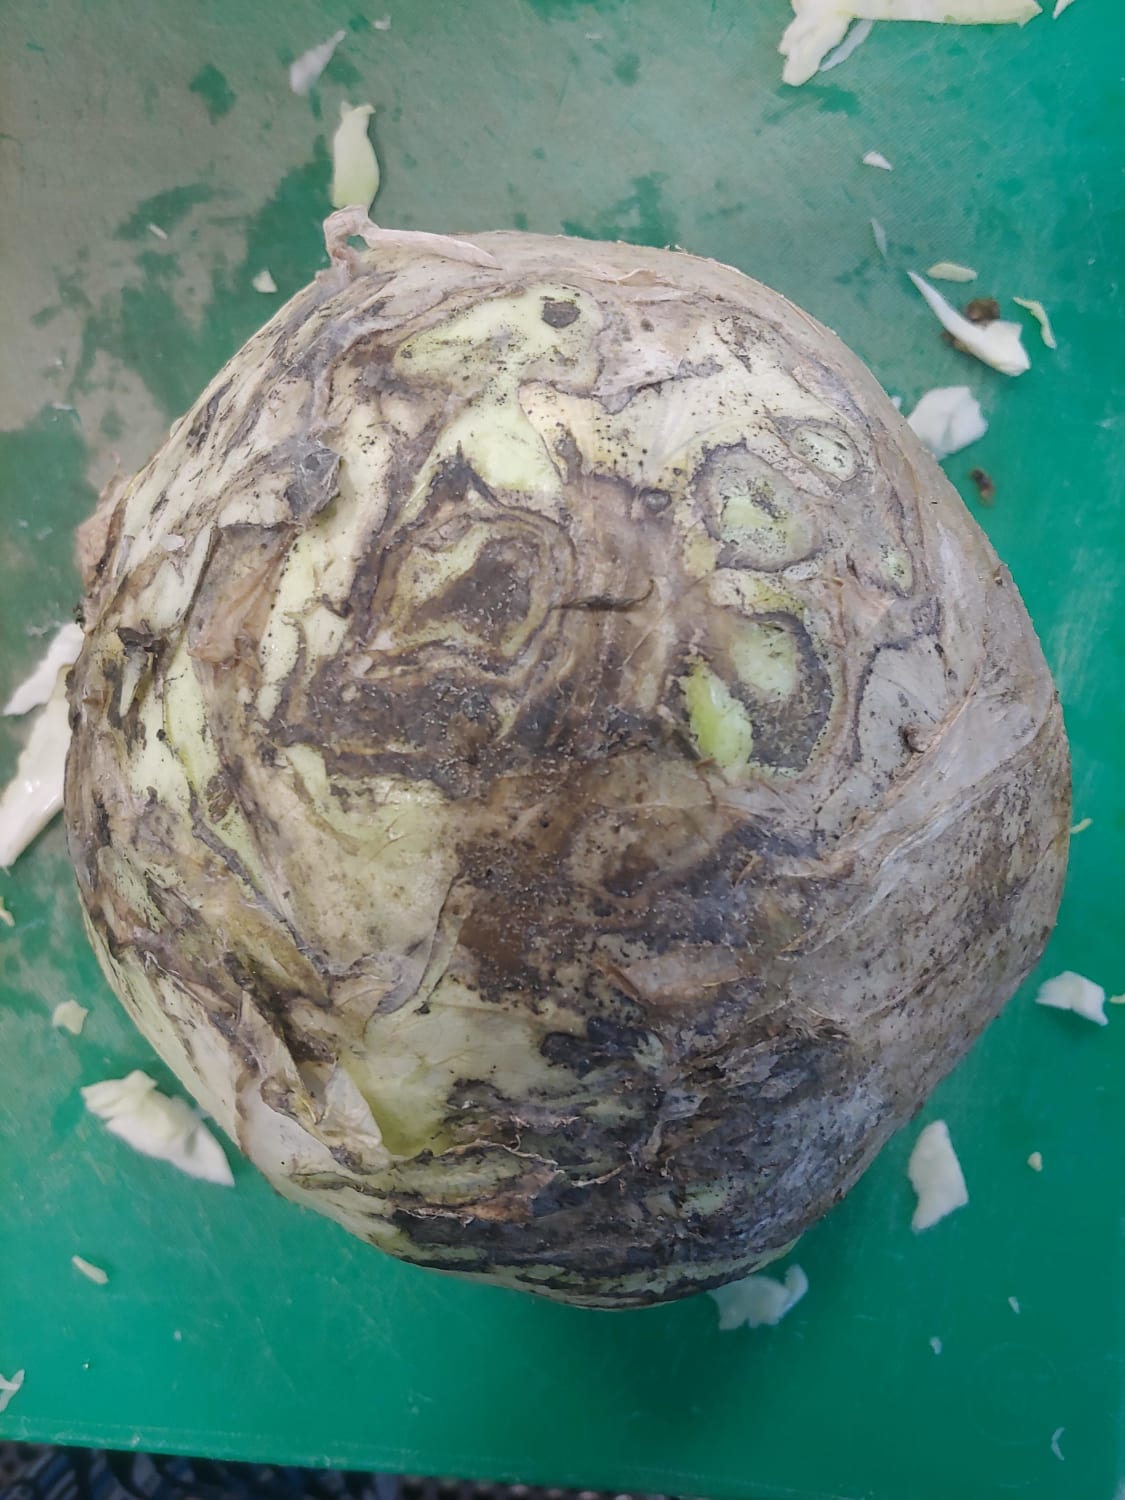 Rotting cabbage looks like a newly discovered gas giant planet